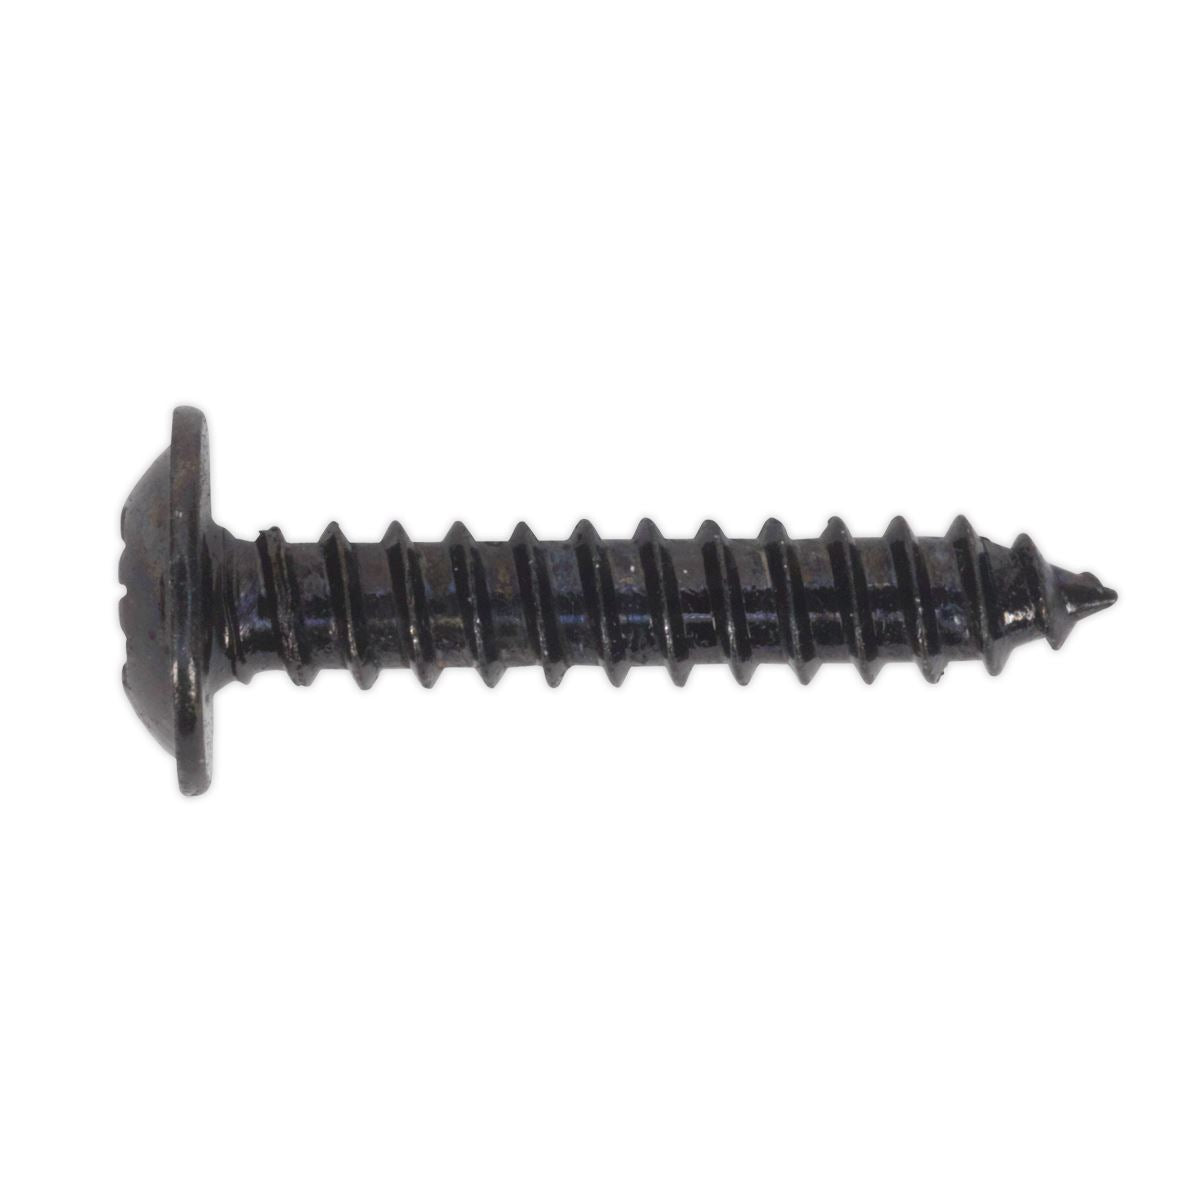 Sealey Self-Tapping Screw 3.5 x 19mm Flanged Head Black Pozi Pack of 100